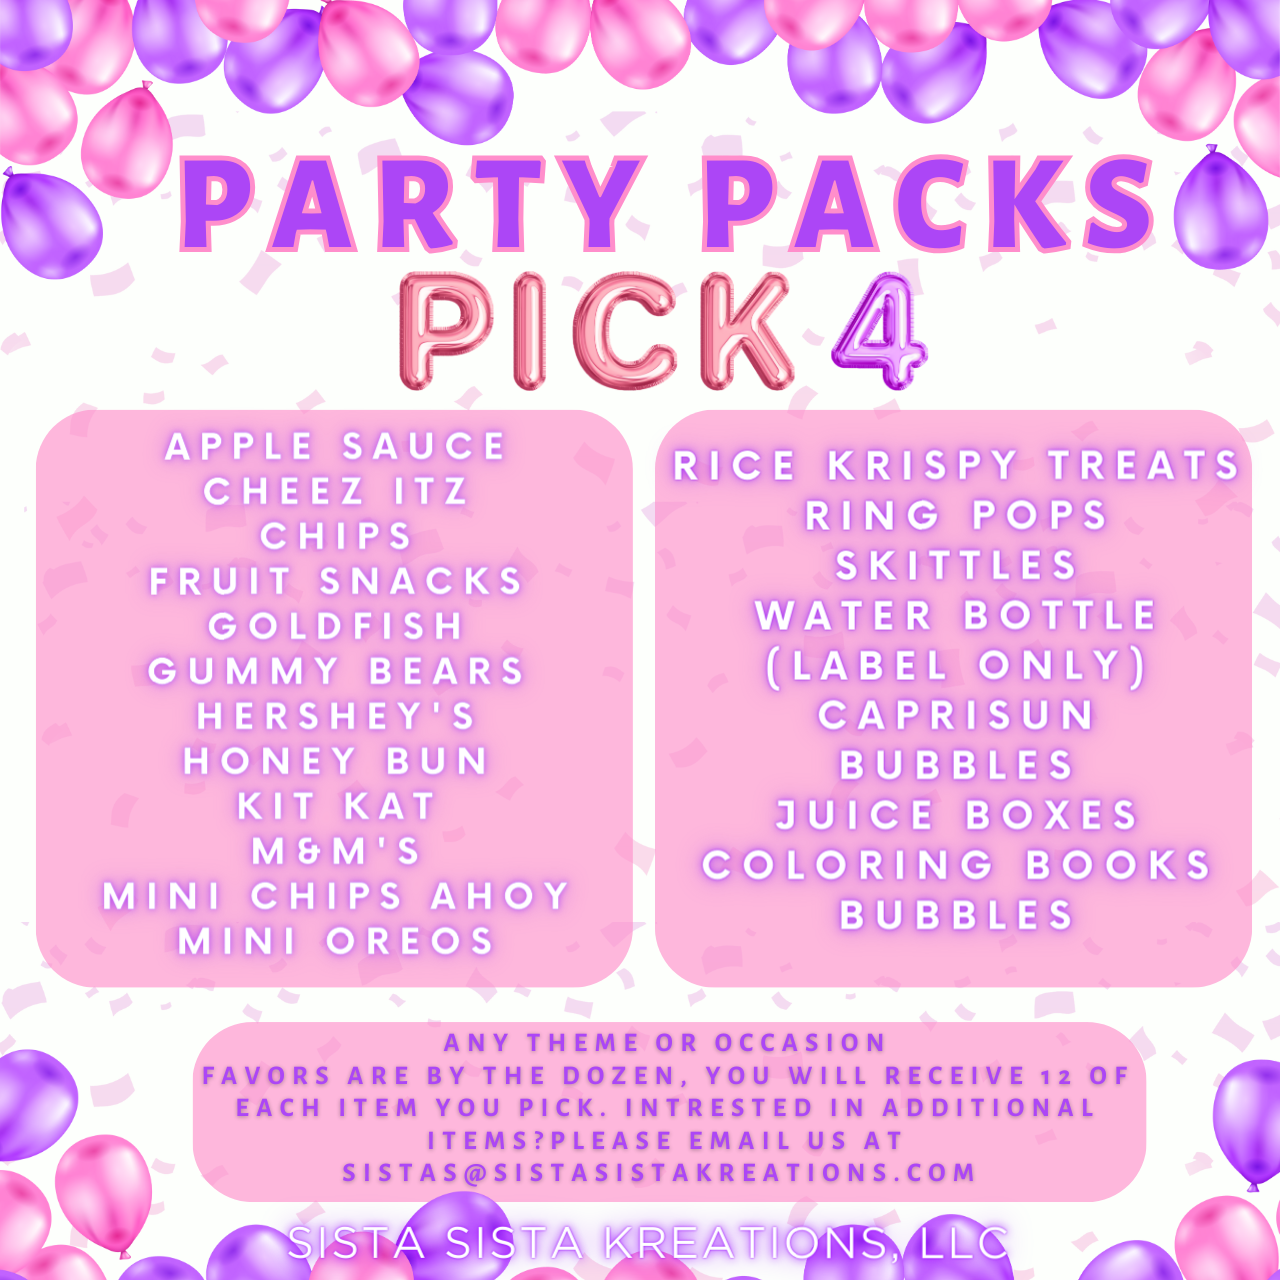 PICK 4 PARTY PACK